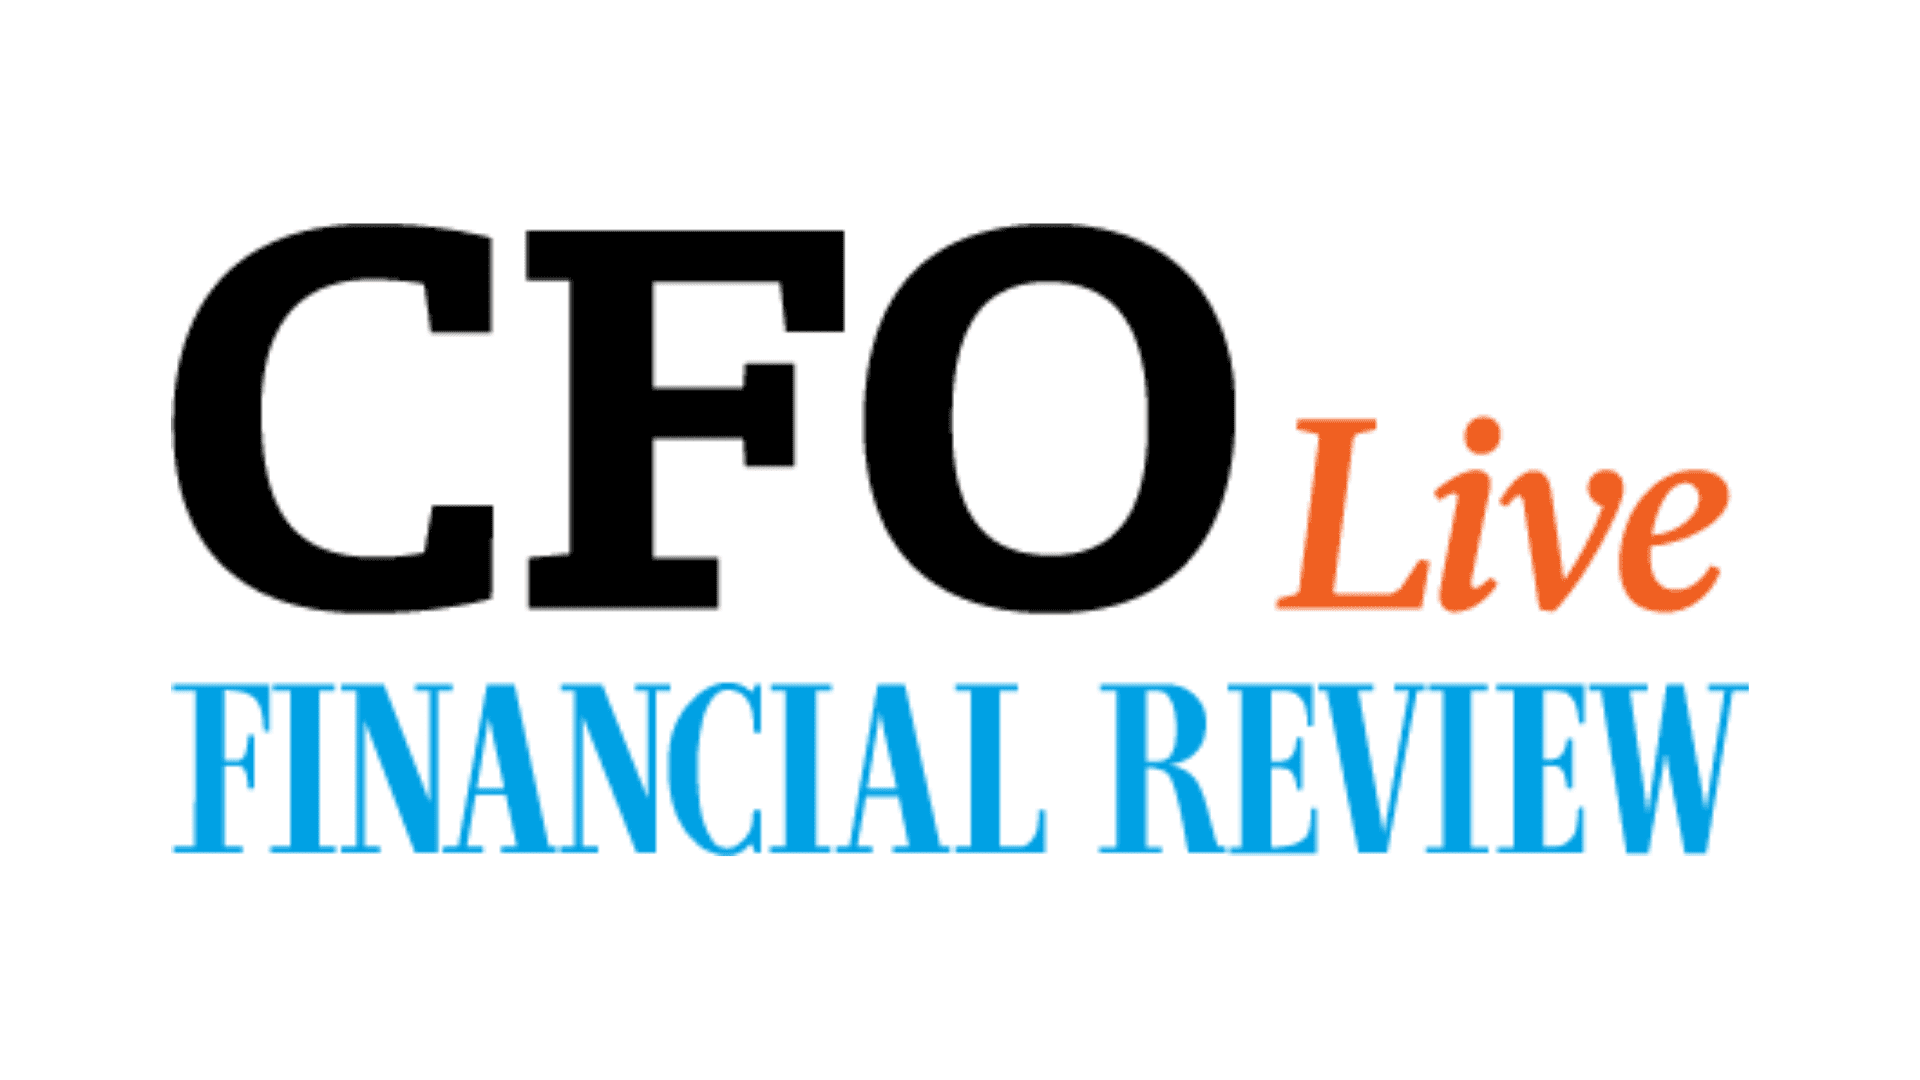 eftsure: Proudly Supporting CFO Live by the Australian Financial Review